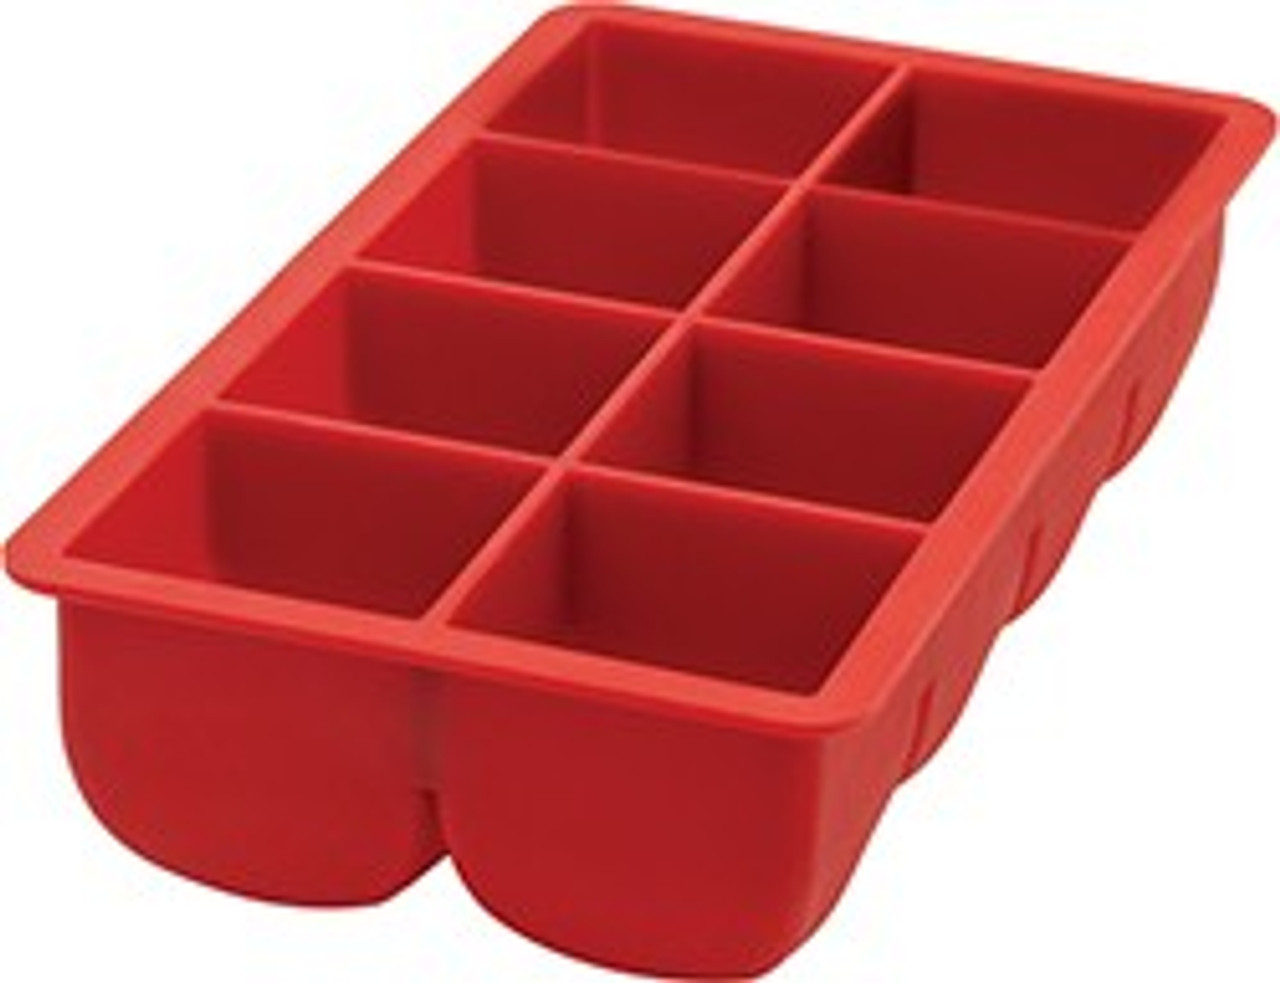 https://cdn11.bigcommerce.com/s-ympg1dfqkh/images/stencil/1280x1280/products/4676/31439/BIG-BLOCK-silicone-ice-cube-tray__38445.1586314452.jpg?c=2